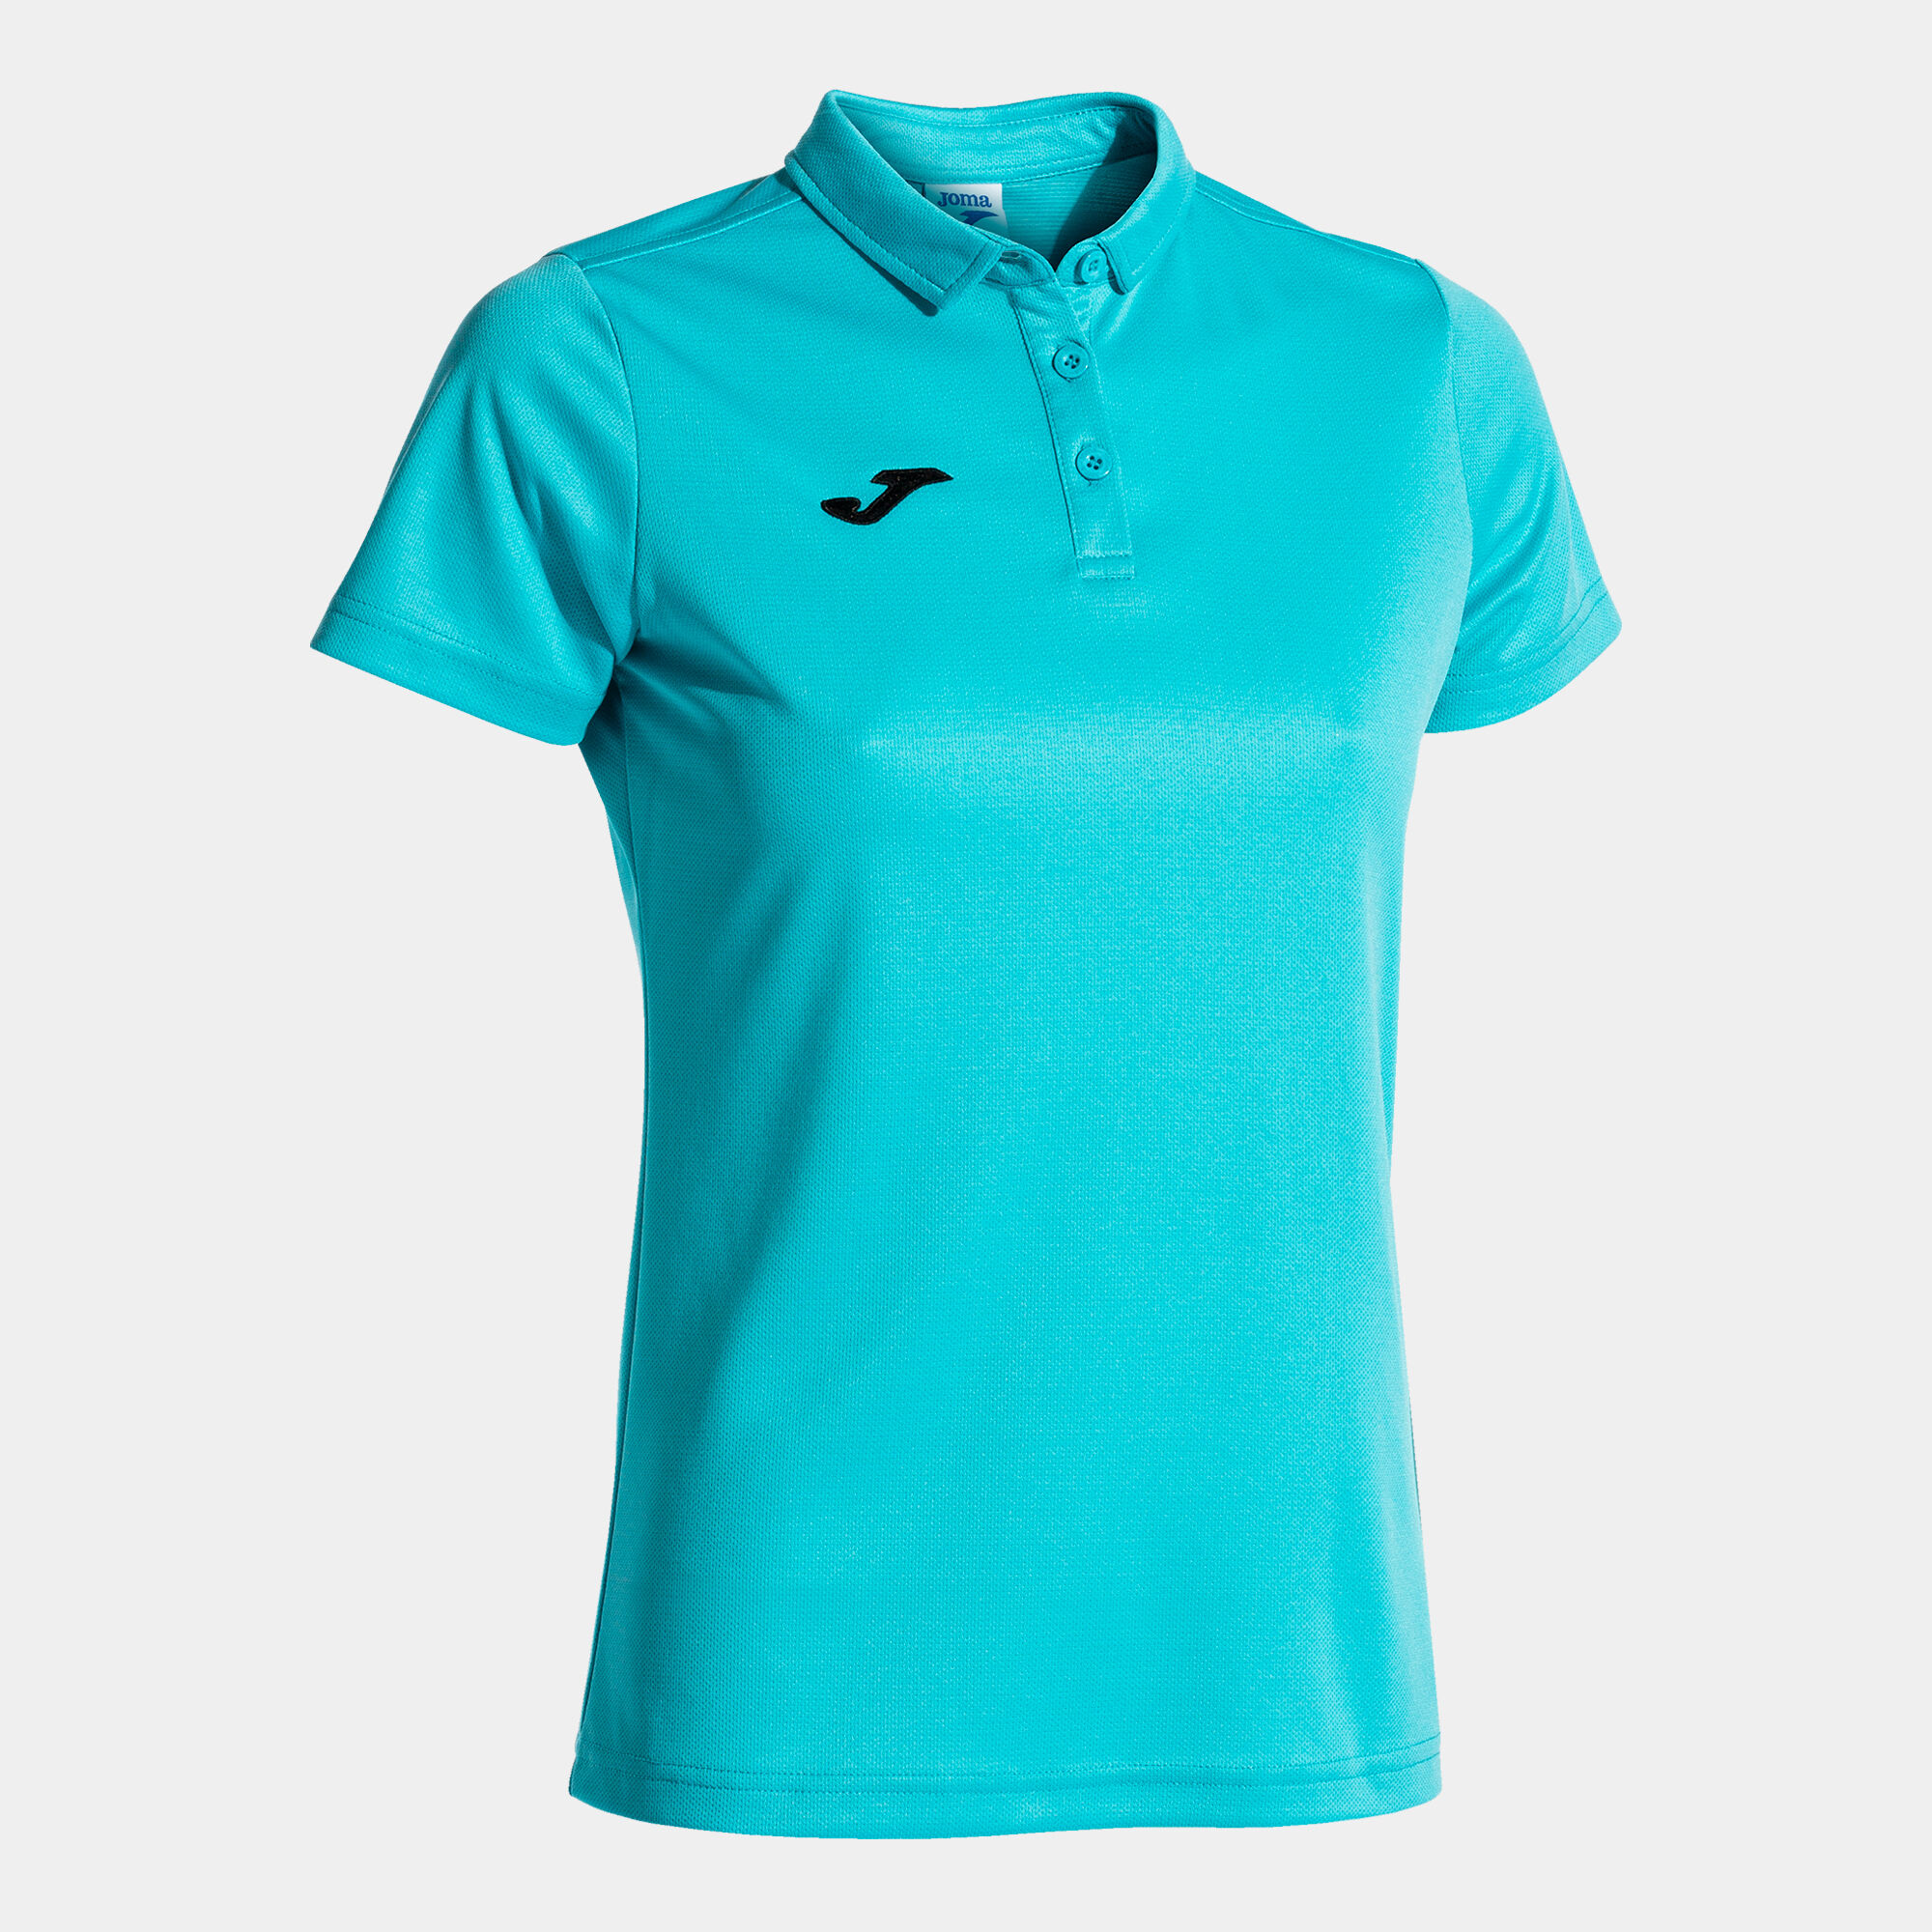 Polo manches courtes femme Hobby turquoise fluo